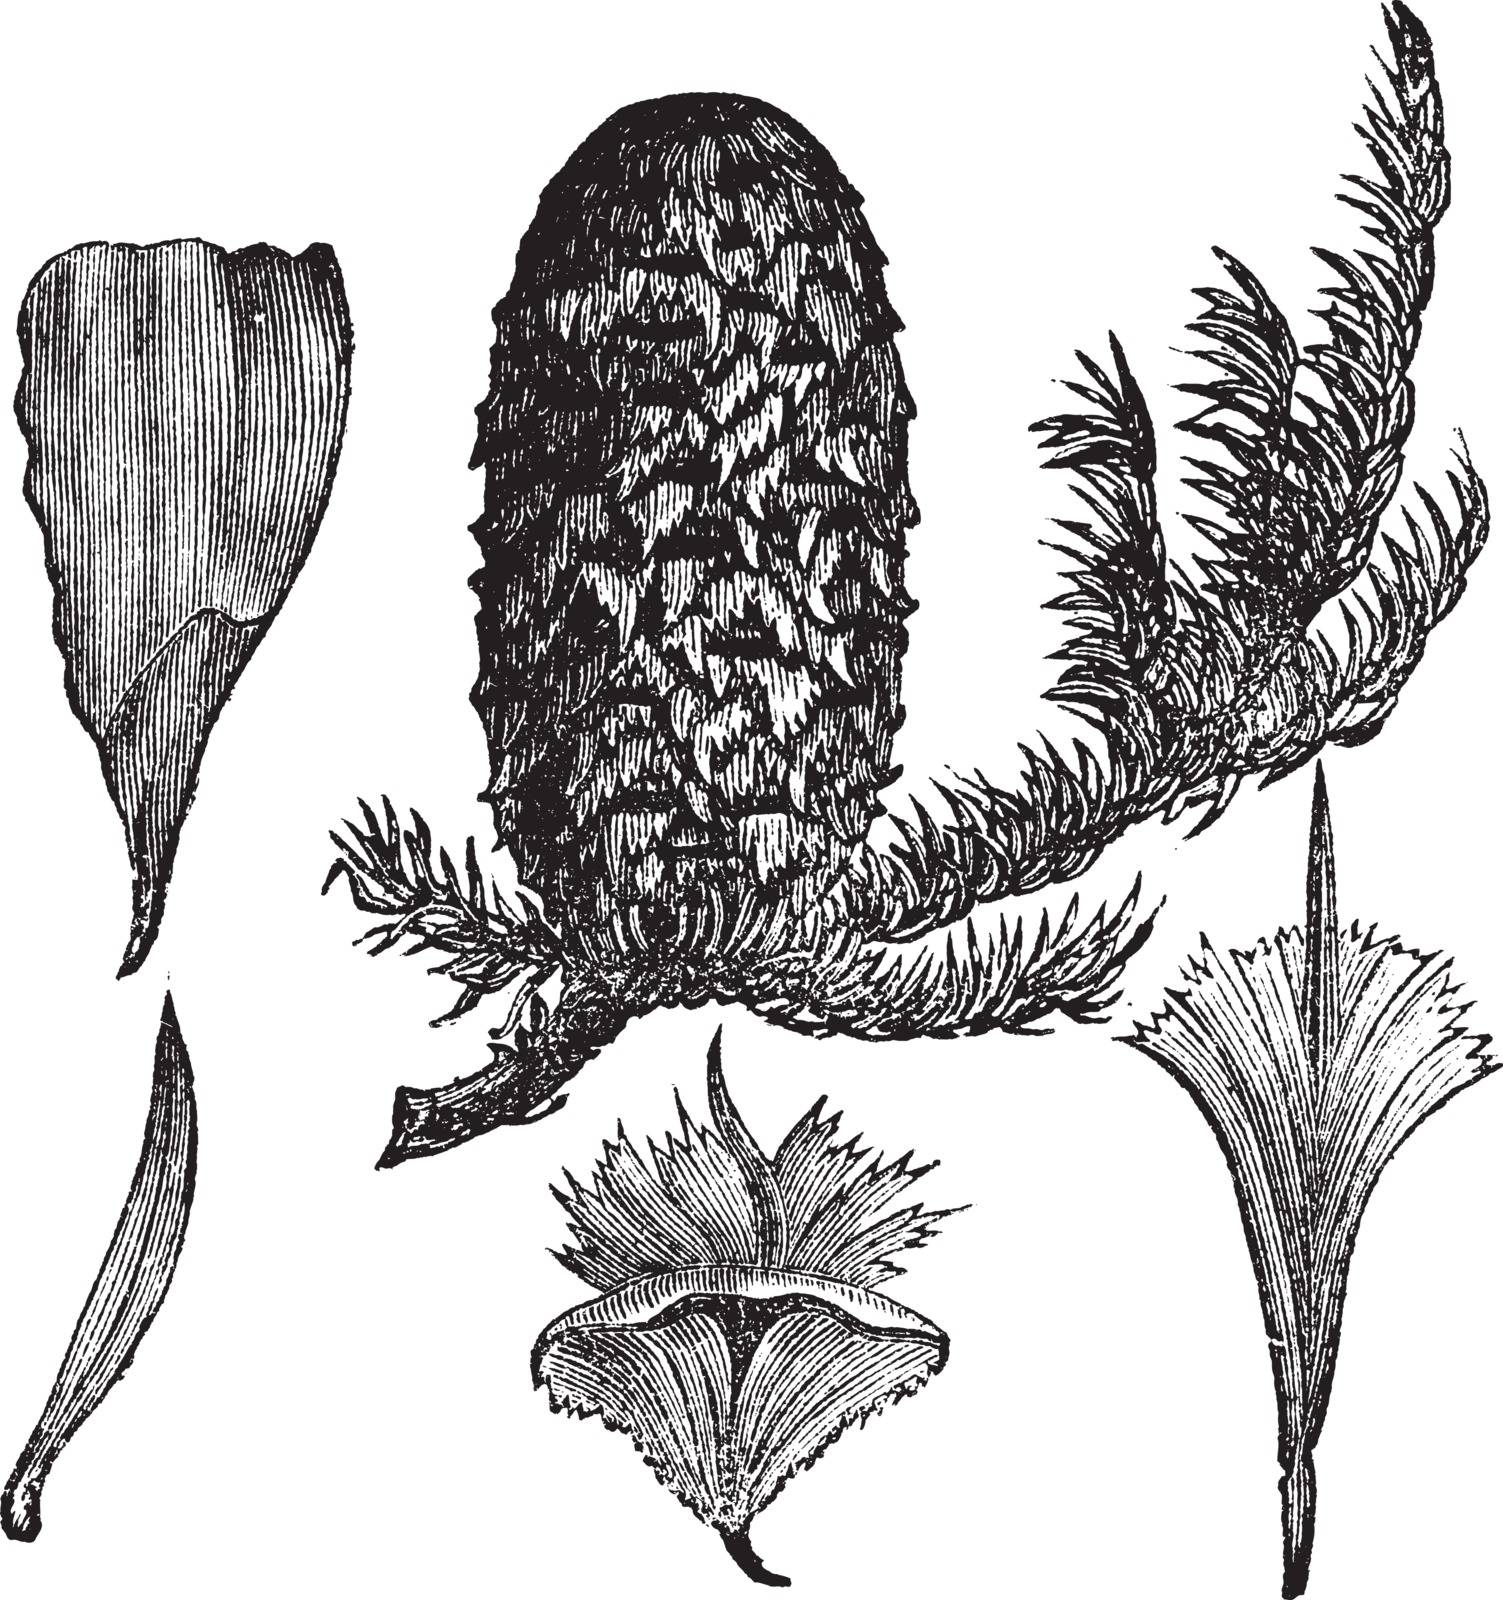 Noble Fir or Abies procera, vintage engraving. Old engraved illustration of Noble Fir isolated on a white background.